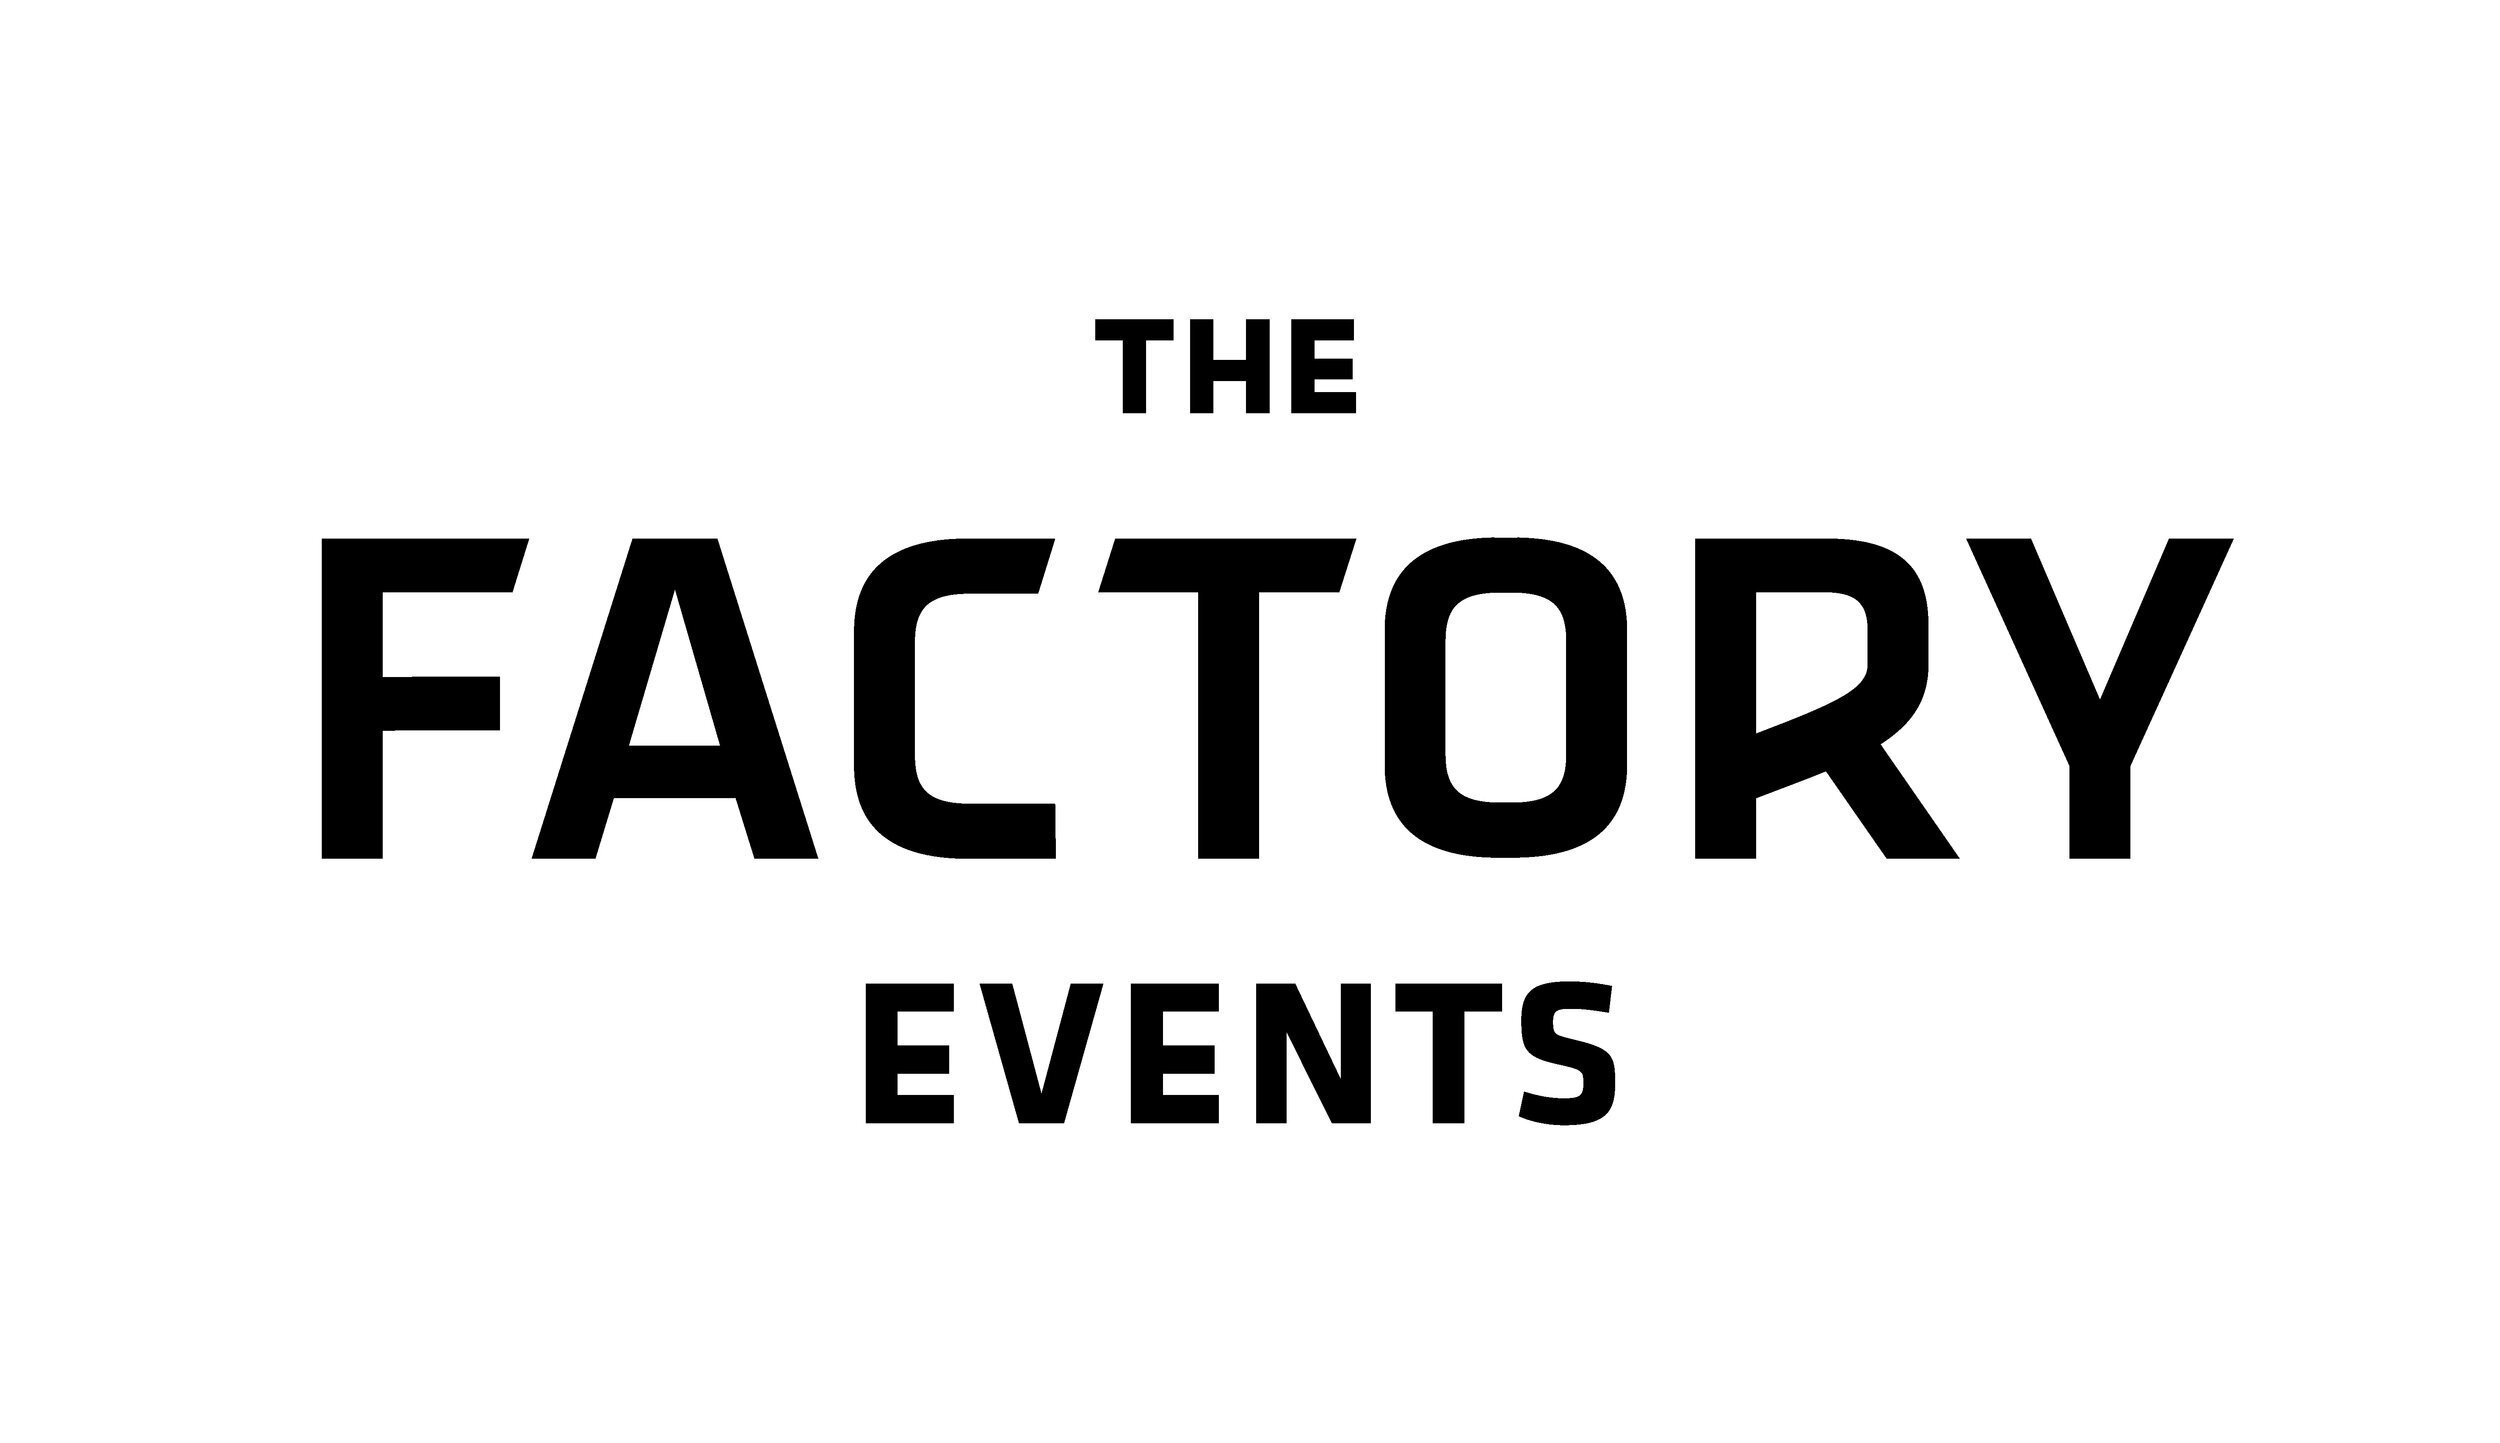 The Factory Events